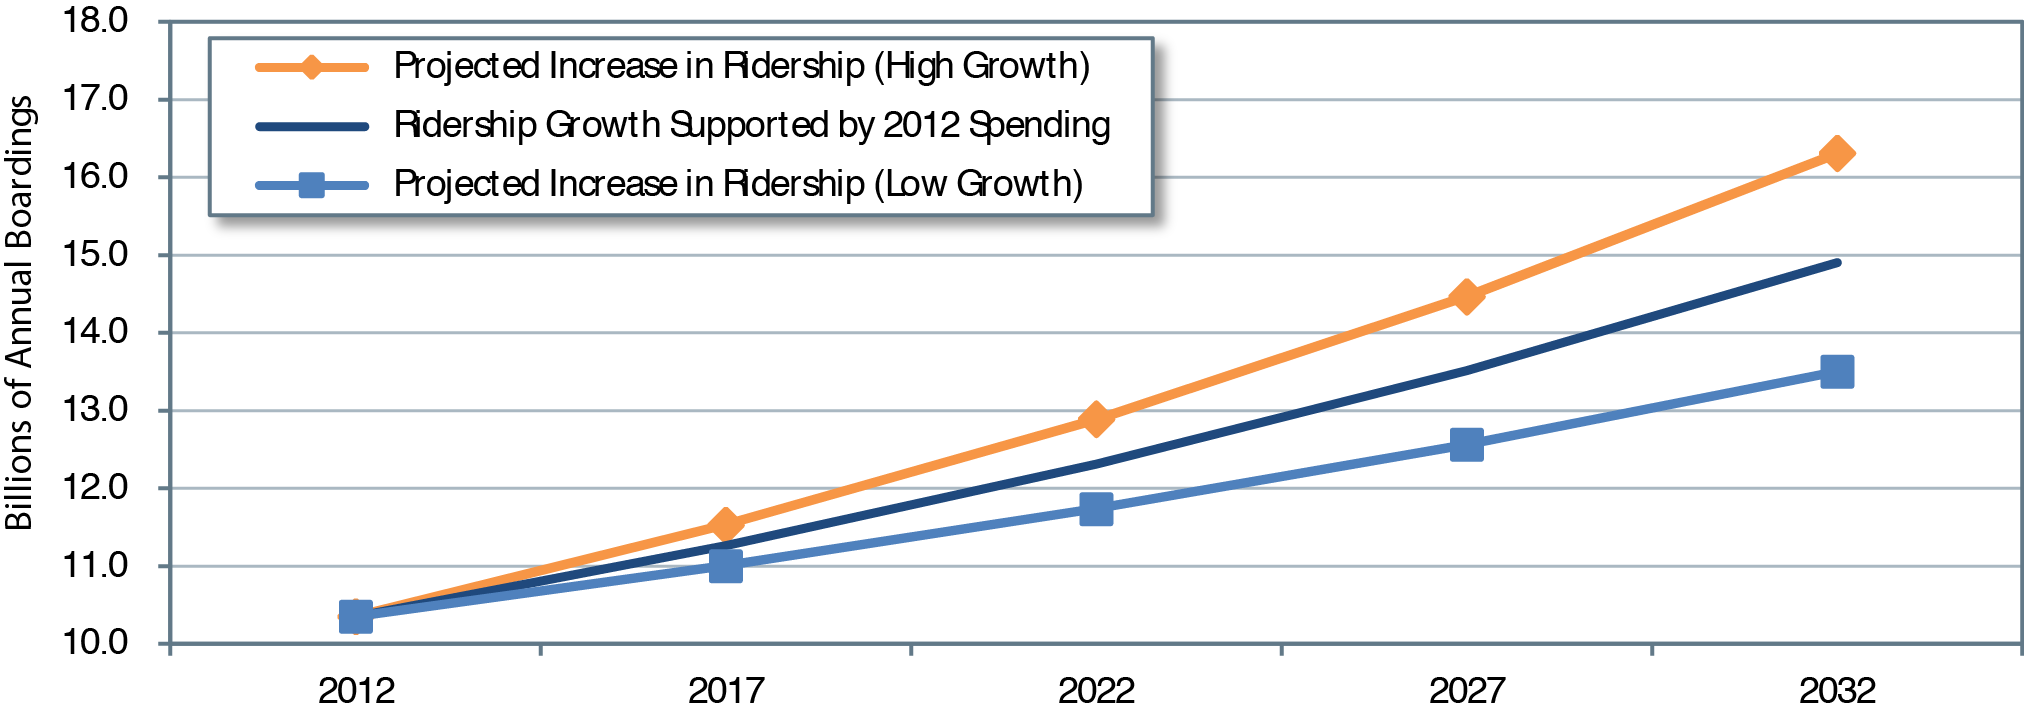 A line graph plots values for annual boardings over time from 2012 to 2032 comparing data based on current spending and two forecast models. For ridership growth supported by 2012 spending, the plot shows an initial value of $10.35 billion boarding in the year 2012, increasing to a value of $11.26 billion in the year 2017, on to a value of $12.31 billion in the year 2022, and ending at a value of $14.90 billion in the year 2032. For the low growth model, the plot has an initial value of $10.35 billion in 2012, increasing to a value of $11.00 billion in the year 2017, on to a value of $11.73 billion in the year 2022, and ending at a value of $13.50 billion in the year 2032. For the high growth model, the plot has an initial value of $10.35 billion in 2012, increasing to a value of $11.53 billion in the year 2017, on to a value of $12.89 billion in the year 2022, and ending at a value of $16.31 billion in the year 2032. Source: Transit Economic Requirements Model. 